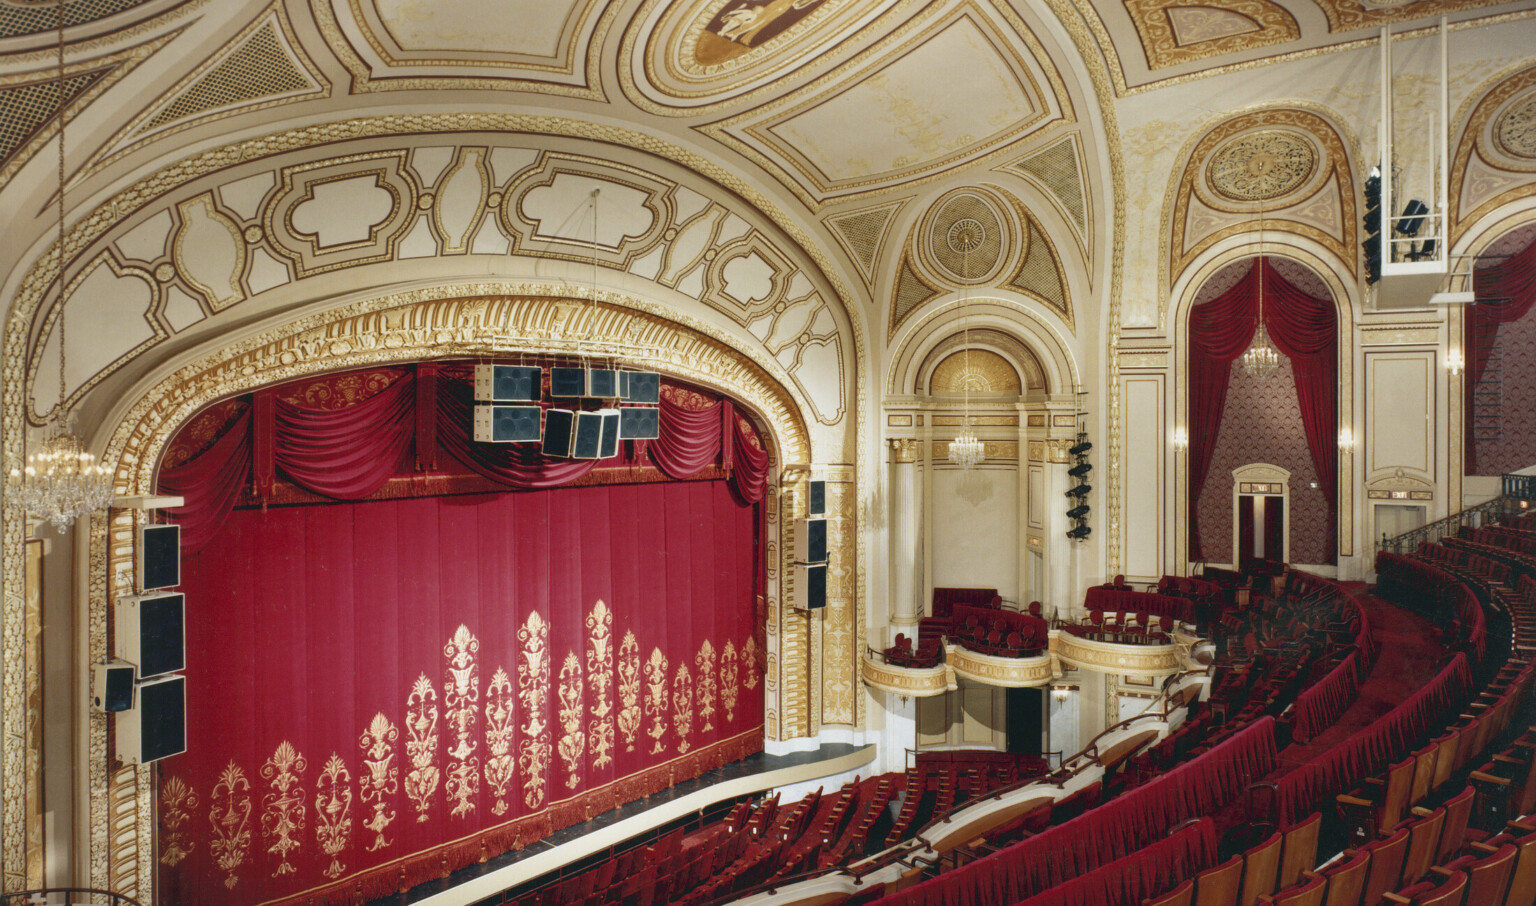 Interior of Playhouse Square's Palace Theatre in Cleveland's renovated theater district with gold leaf ceiling ornamentation, red velvet curtains and matching red seating